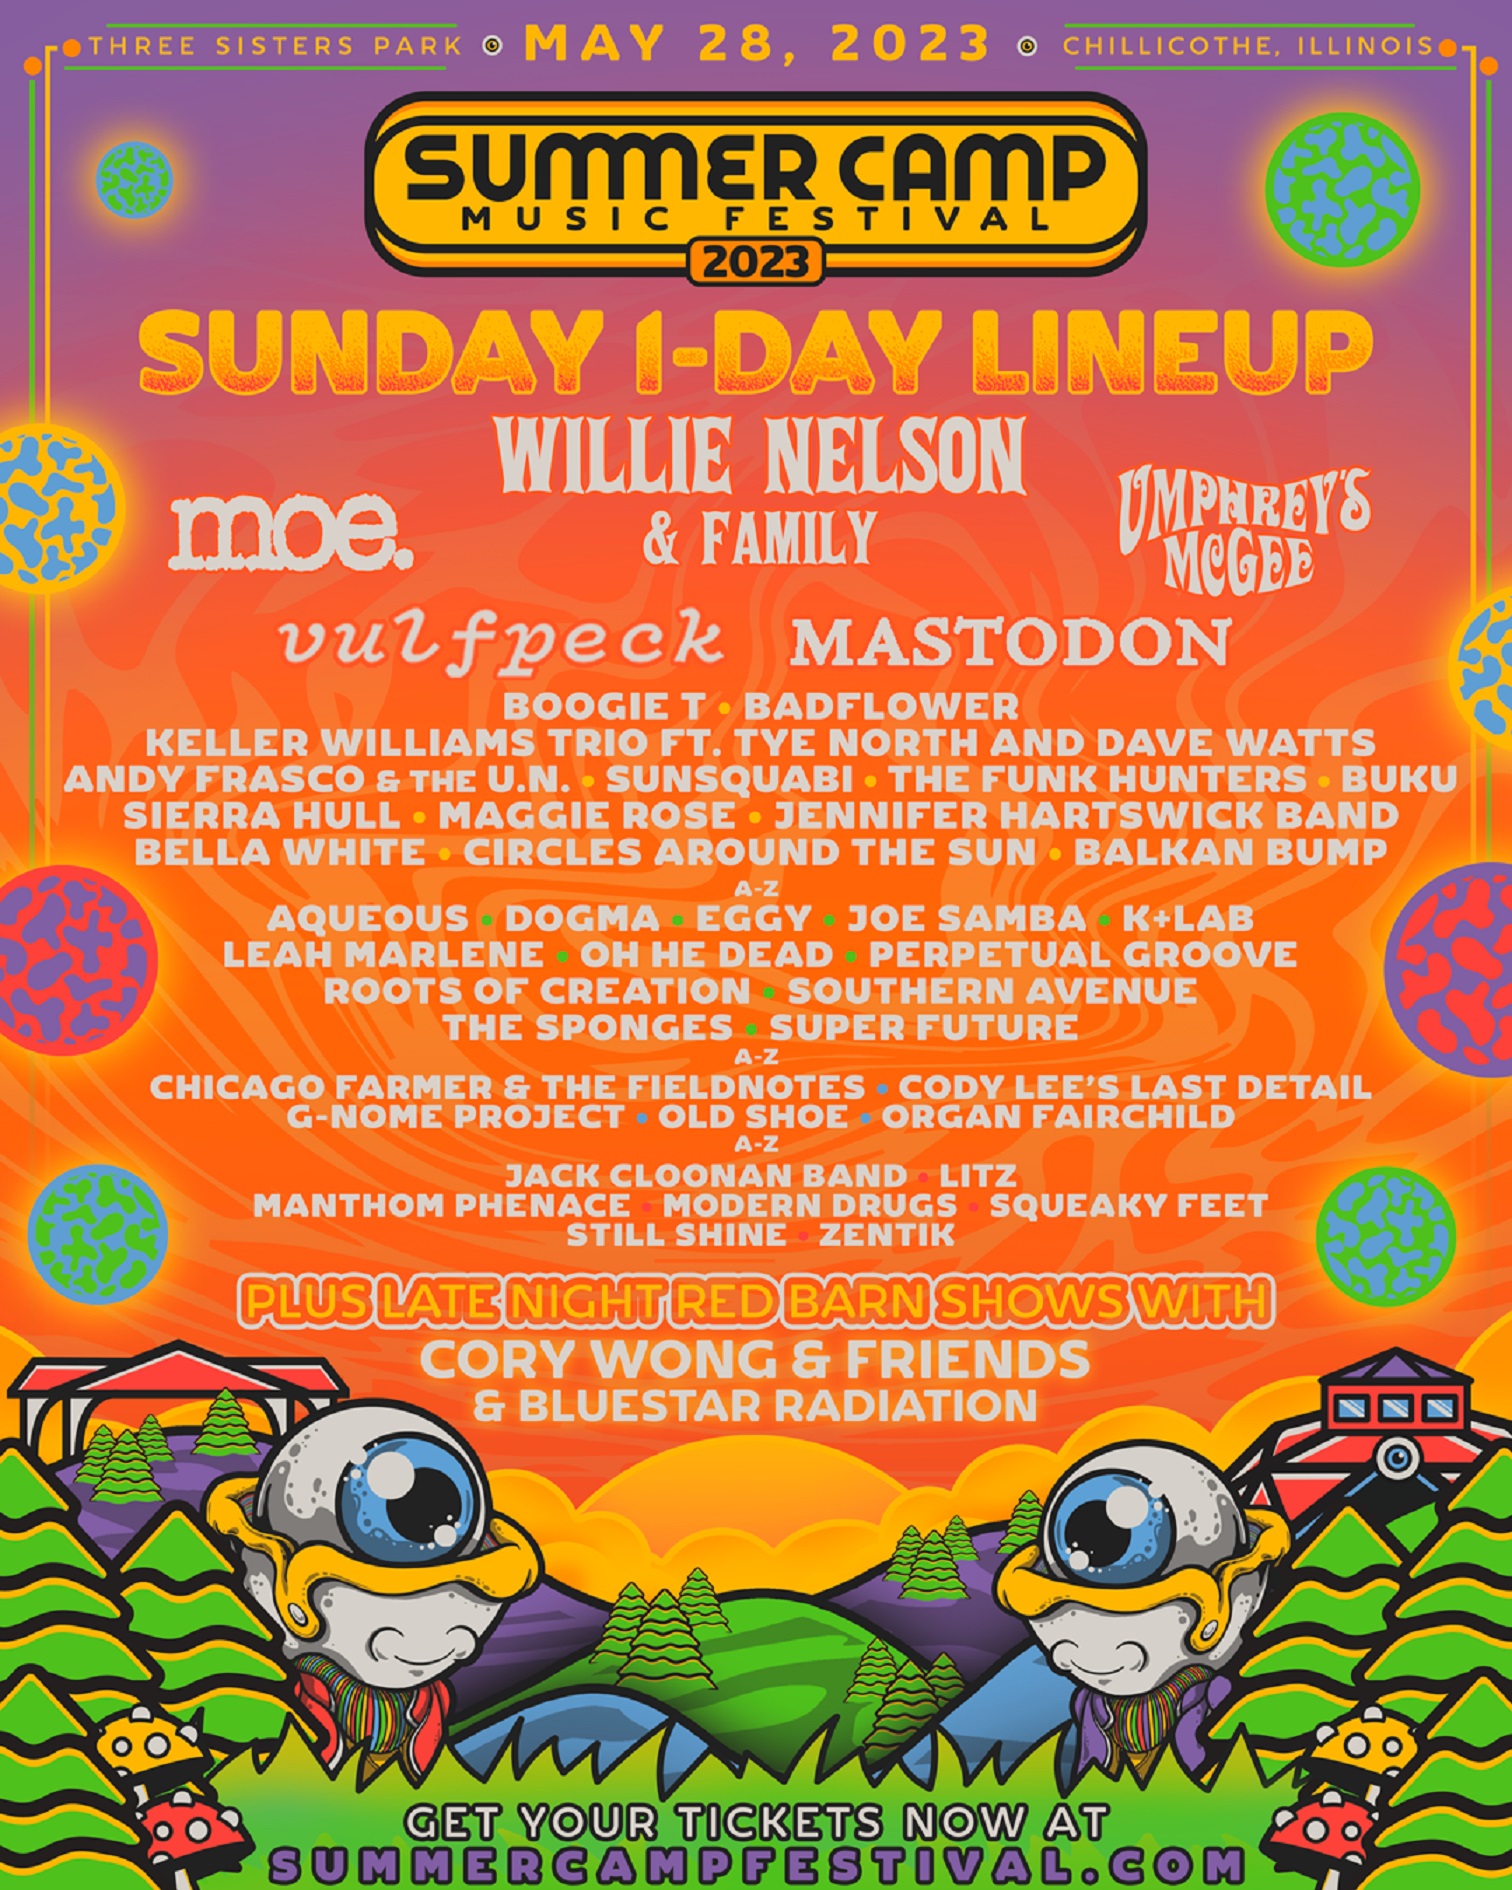 Summer Camp Music Festival is proud to present the Sunday 1-Day lineup for the annual Memorial Day Weekend